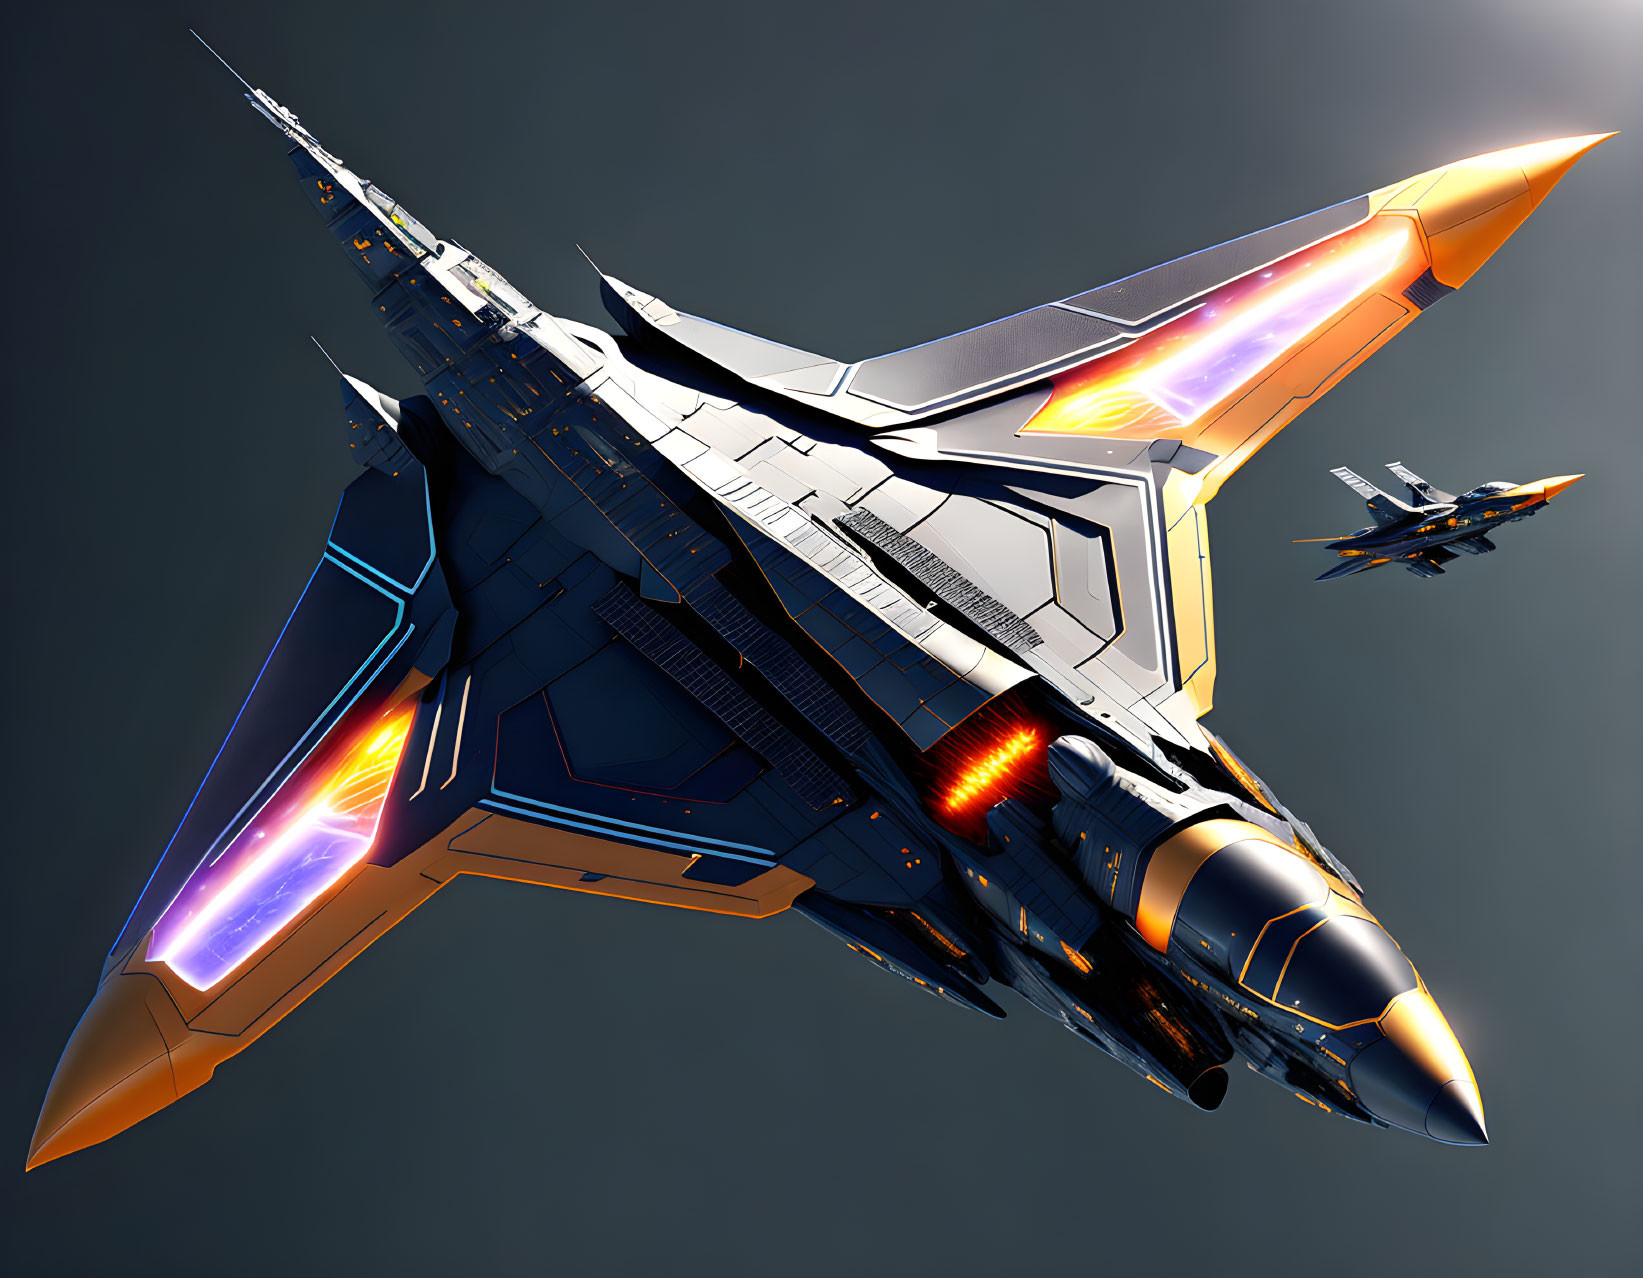 A hypersonic fighter